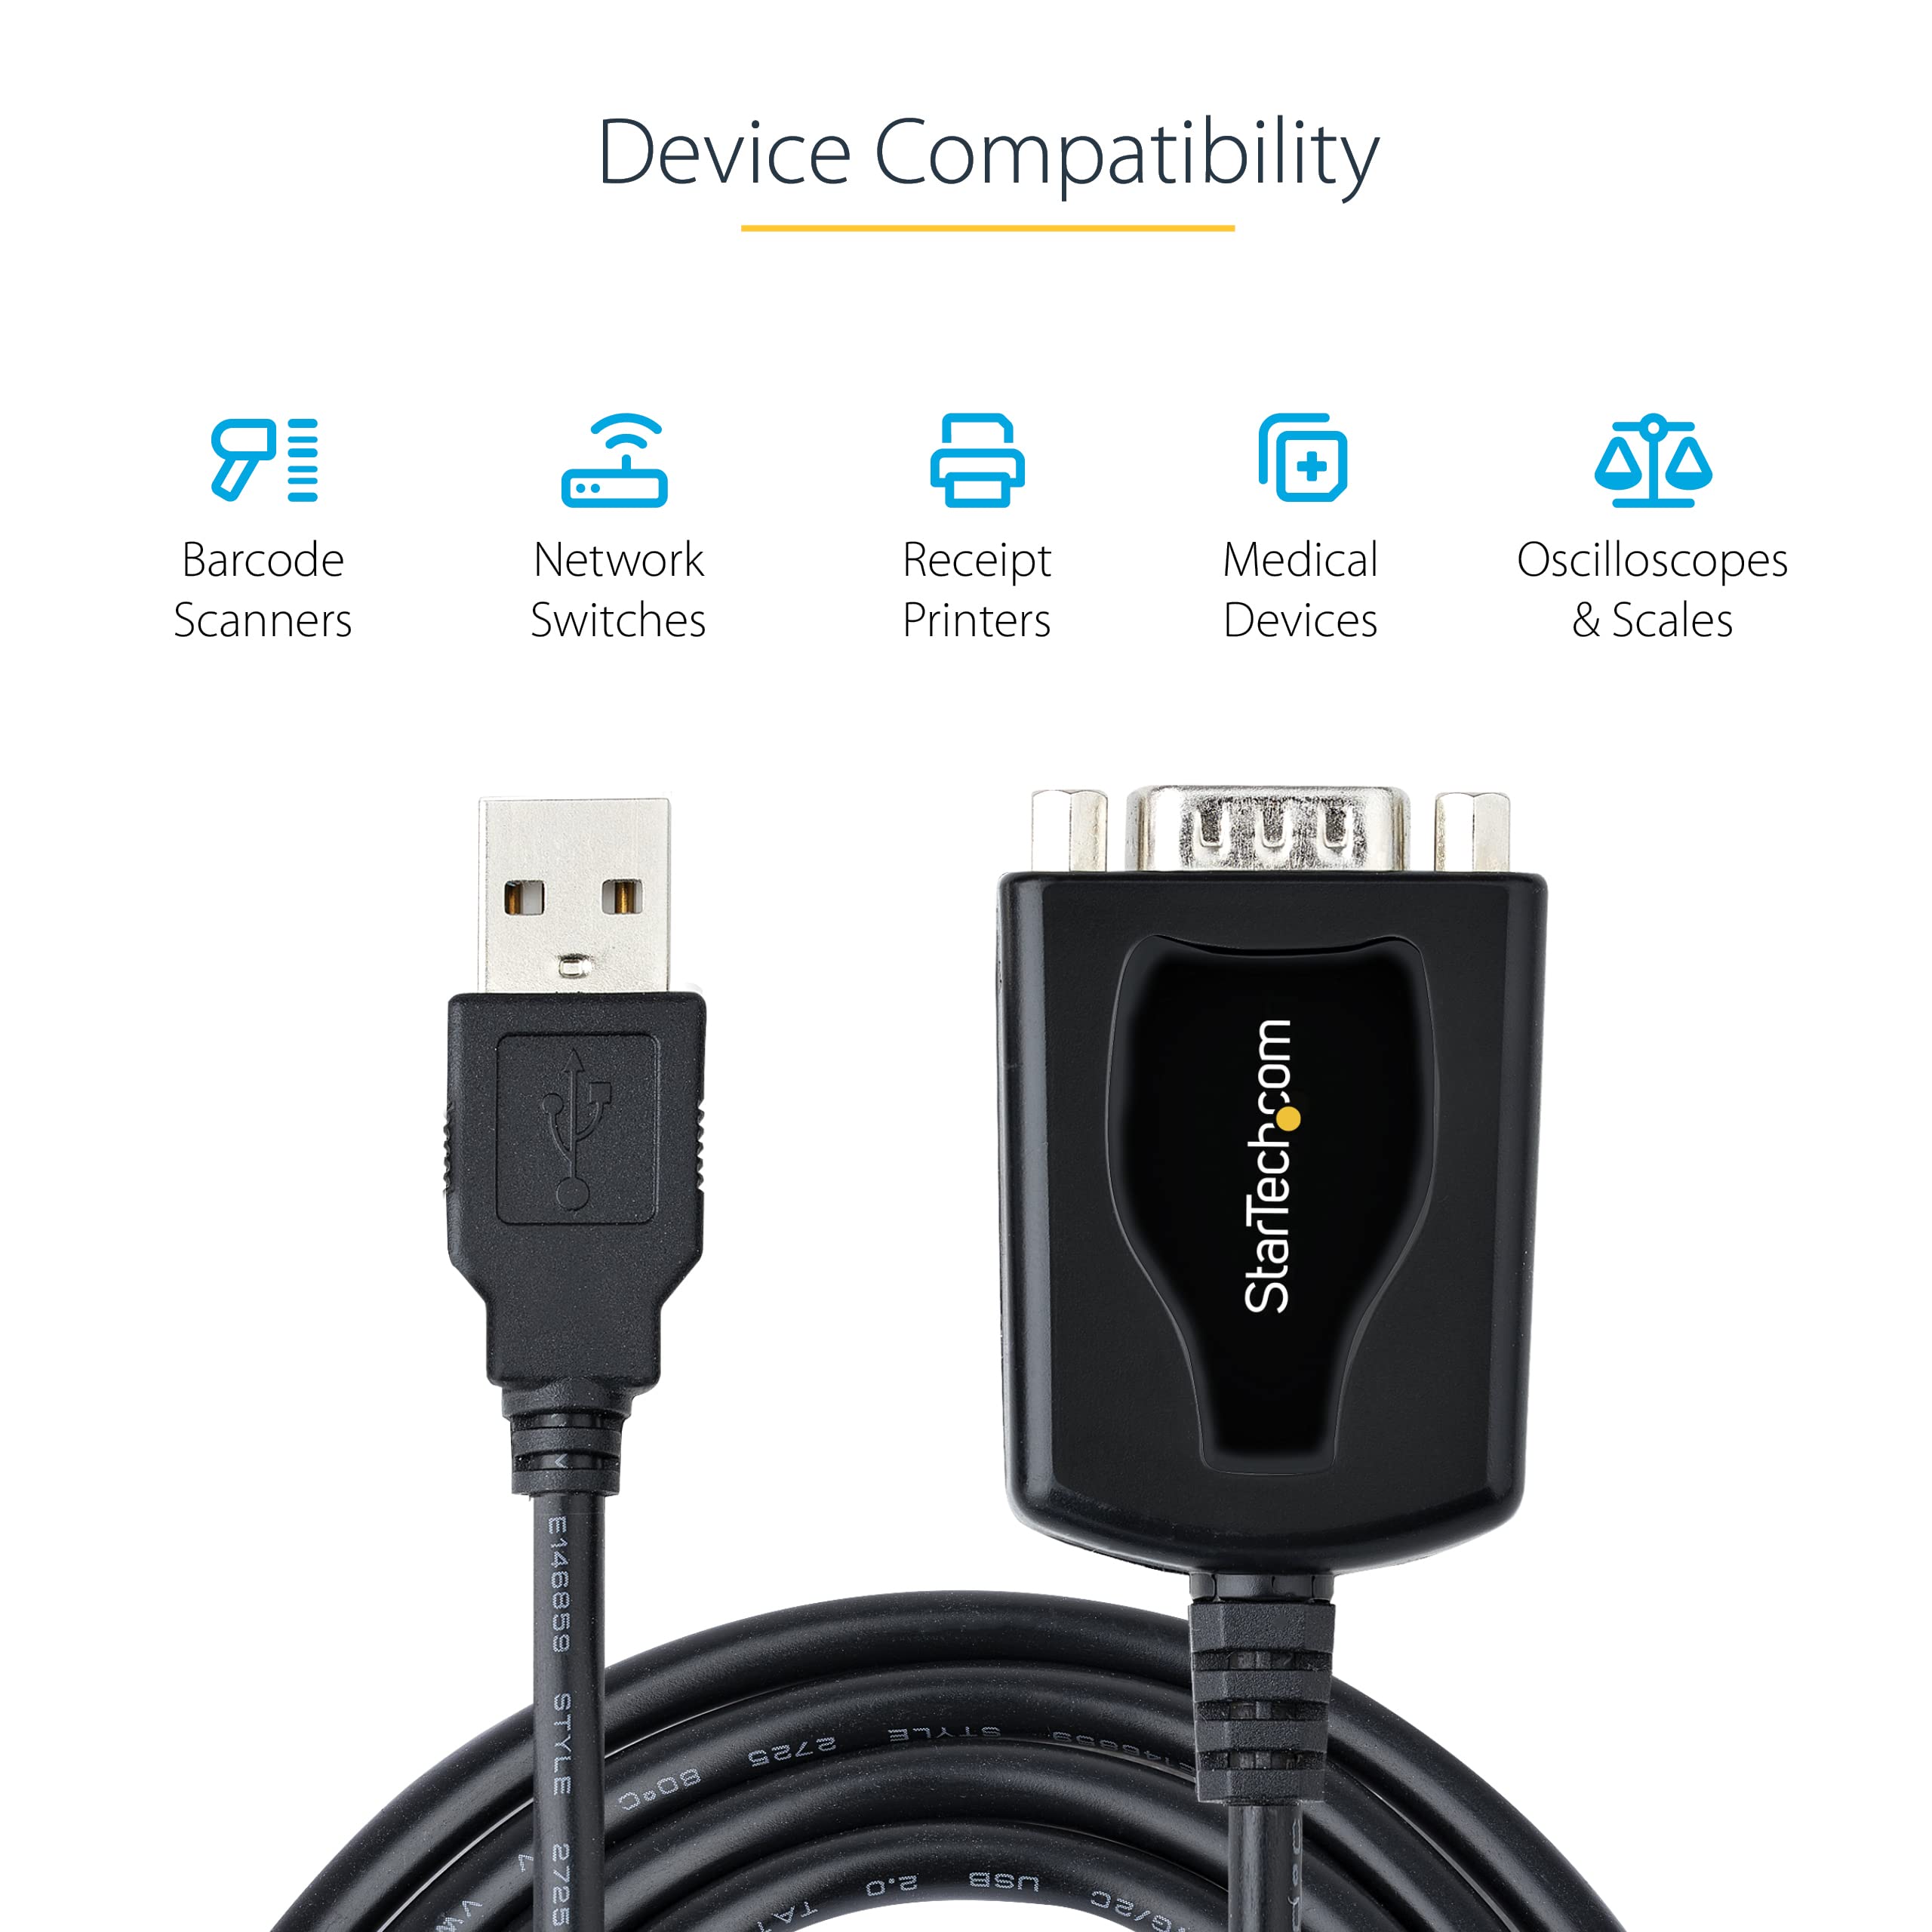 StarTech.com 3ft (1m) USB to Serial Cable with COM Port Retention, DB9 Male RS232 to USB Converter, USB to Serial Adapter for PLC/Printer/Scanner, Prolific Chipset, Windows/Mac (1P3FPC-USB-SERIAL)